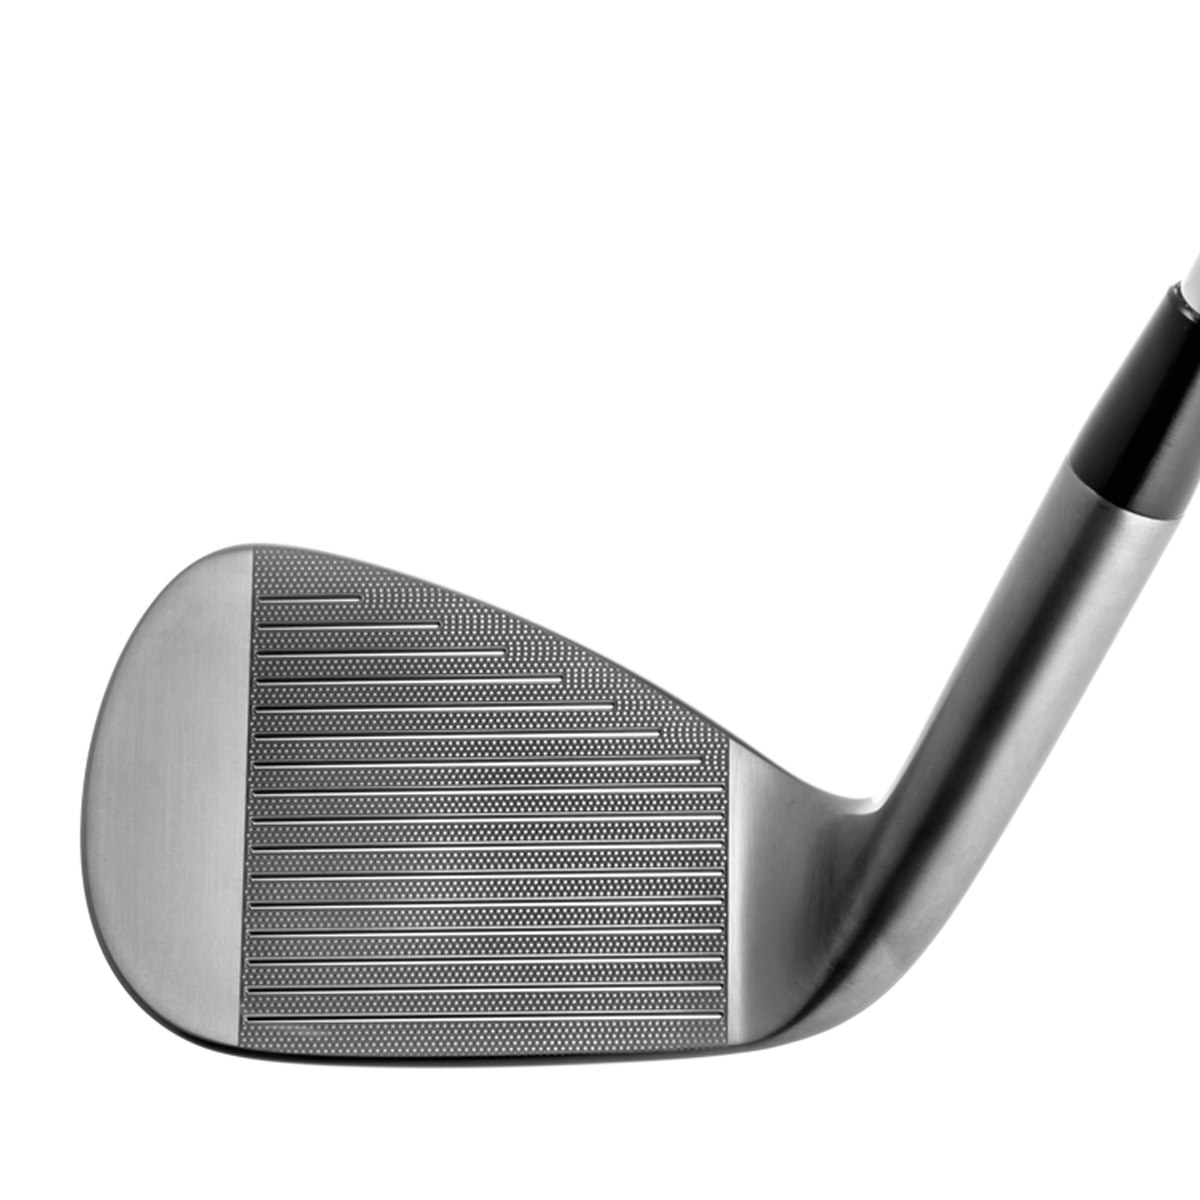 PROTOCONCEPT Golf, Forged Wedge - 14